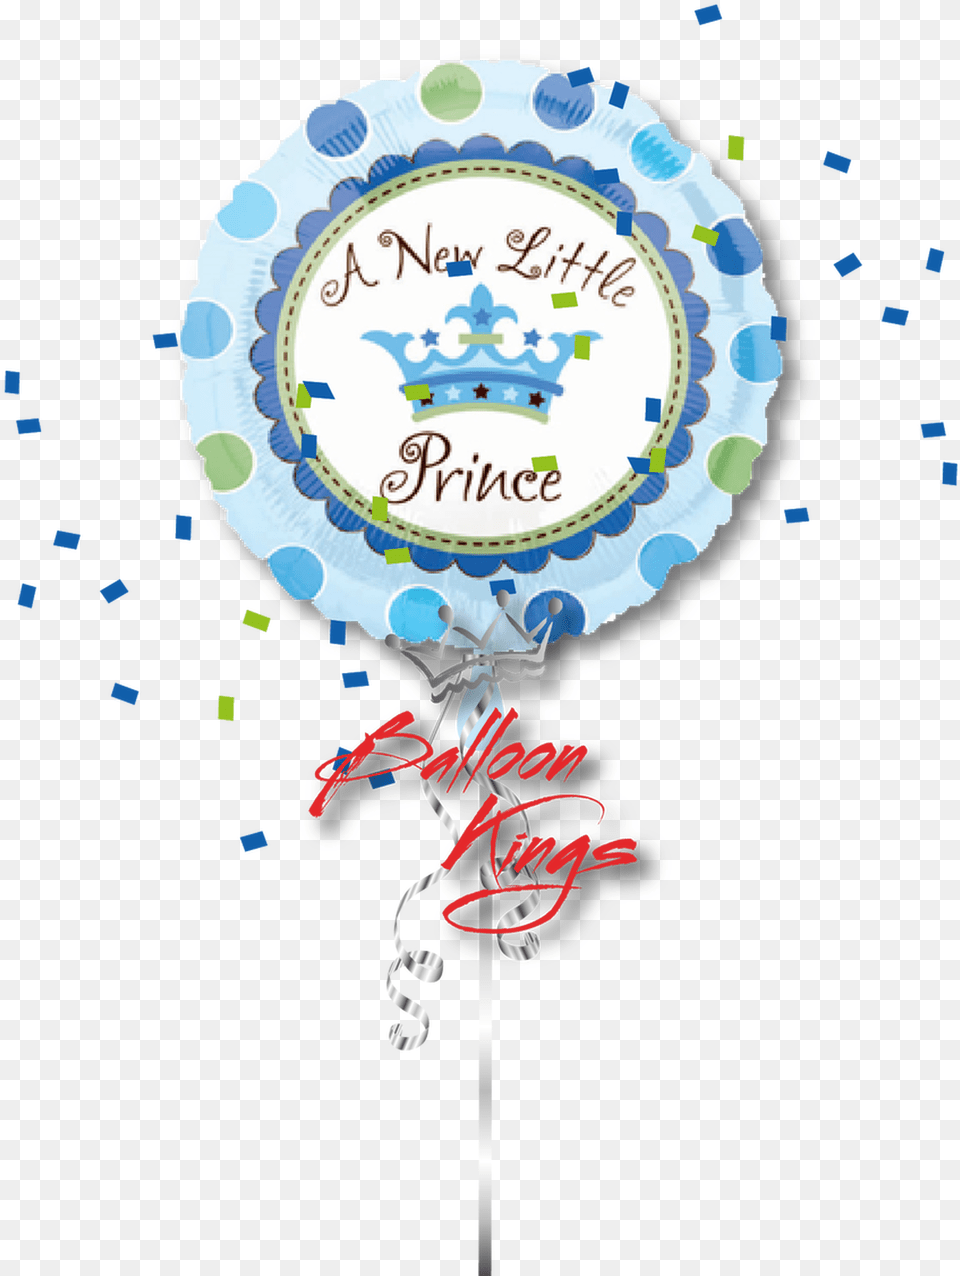 Little Prince Its A Little Prince, Food, Sweets, Balloon, Candy Png Image